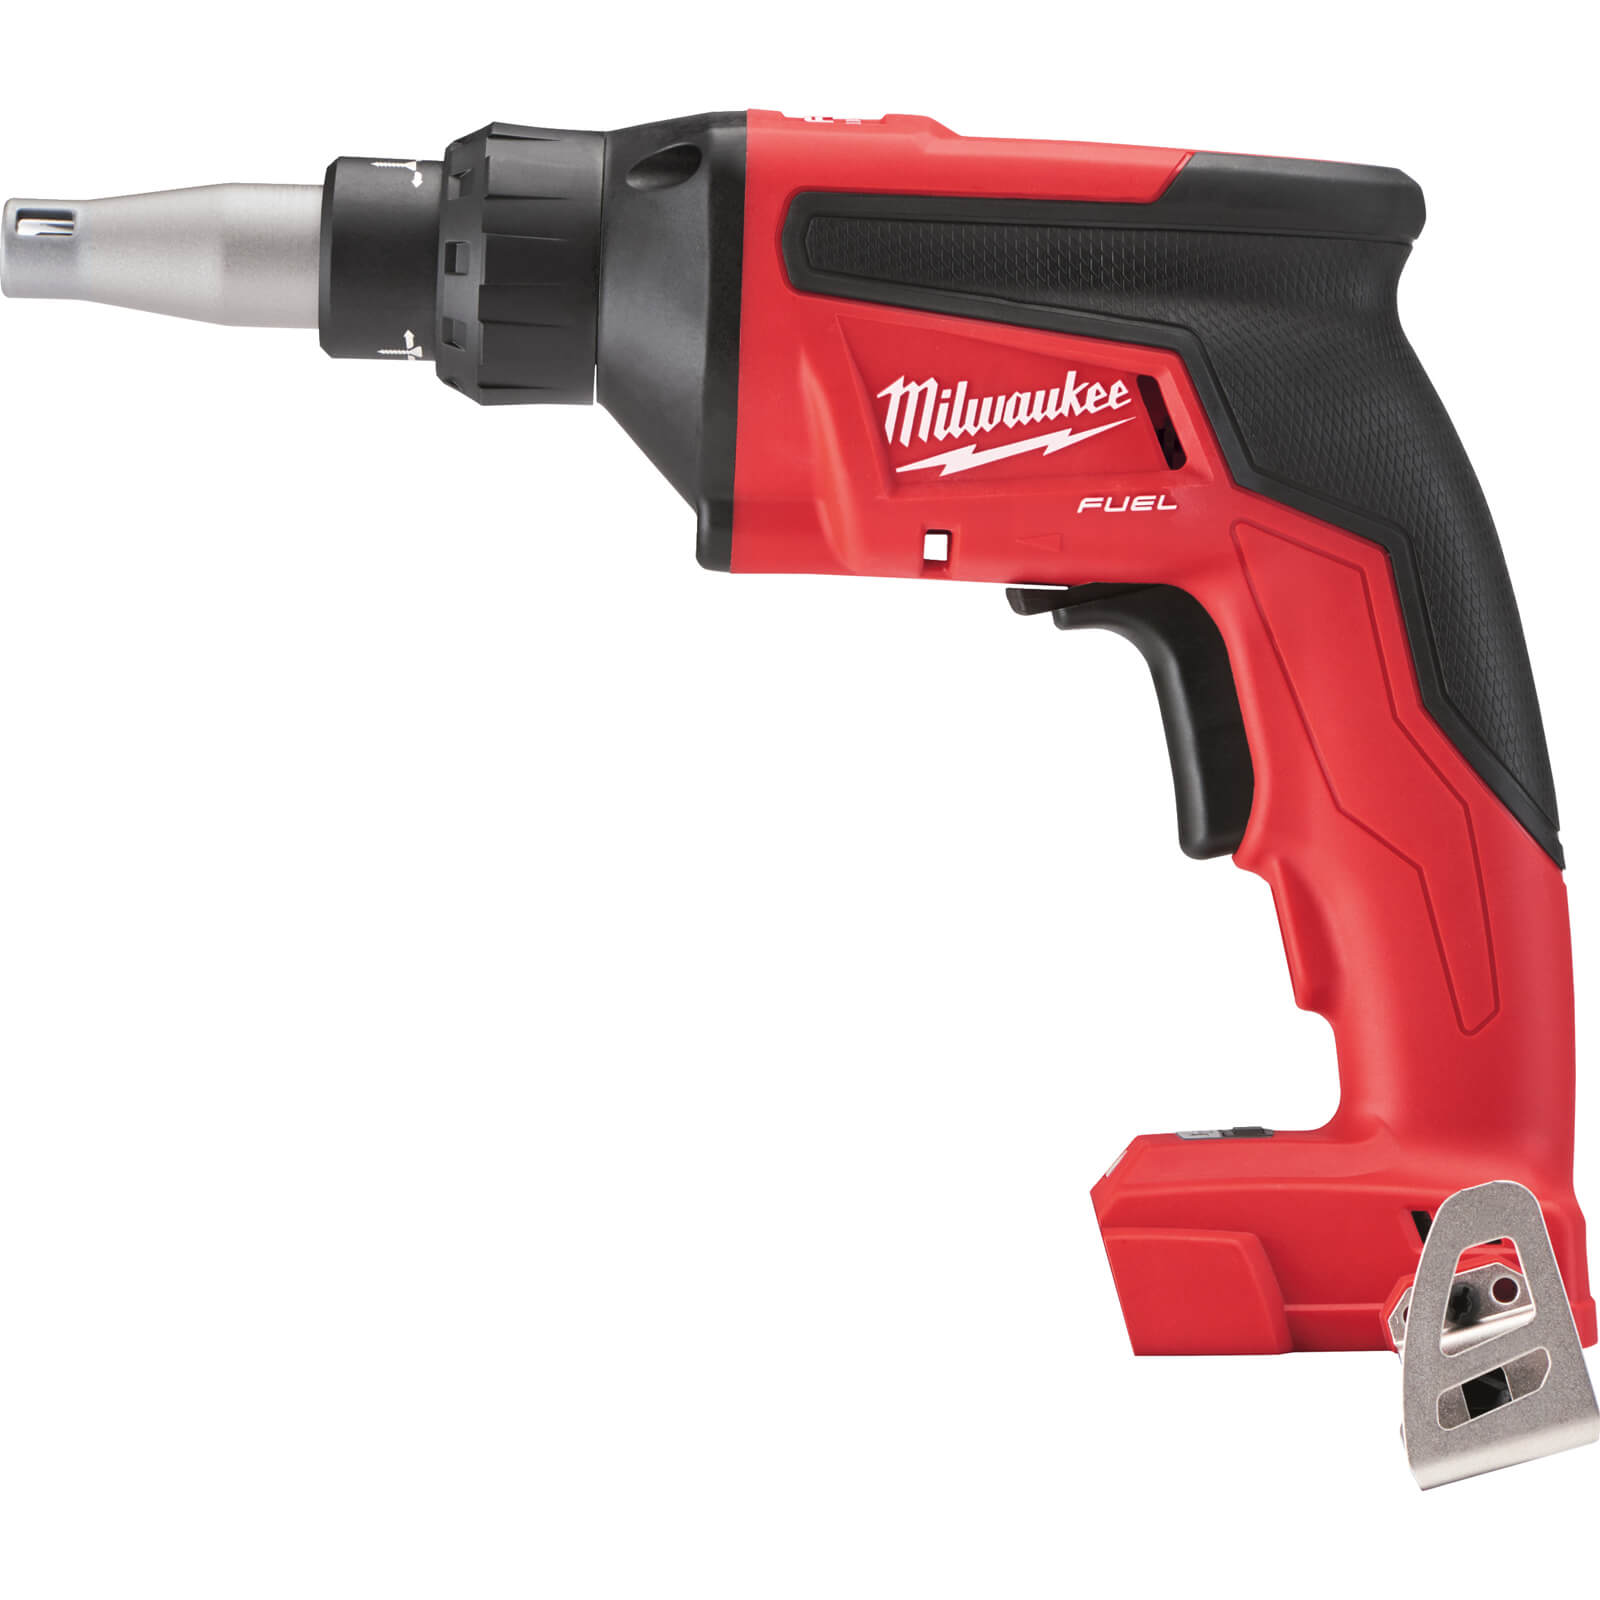 Image of Milwaukee M18 FSG Fuel 18v Cordless Brushless Screwdriver No Batteries No Charger Case